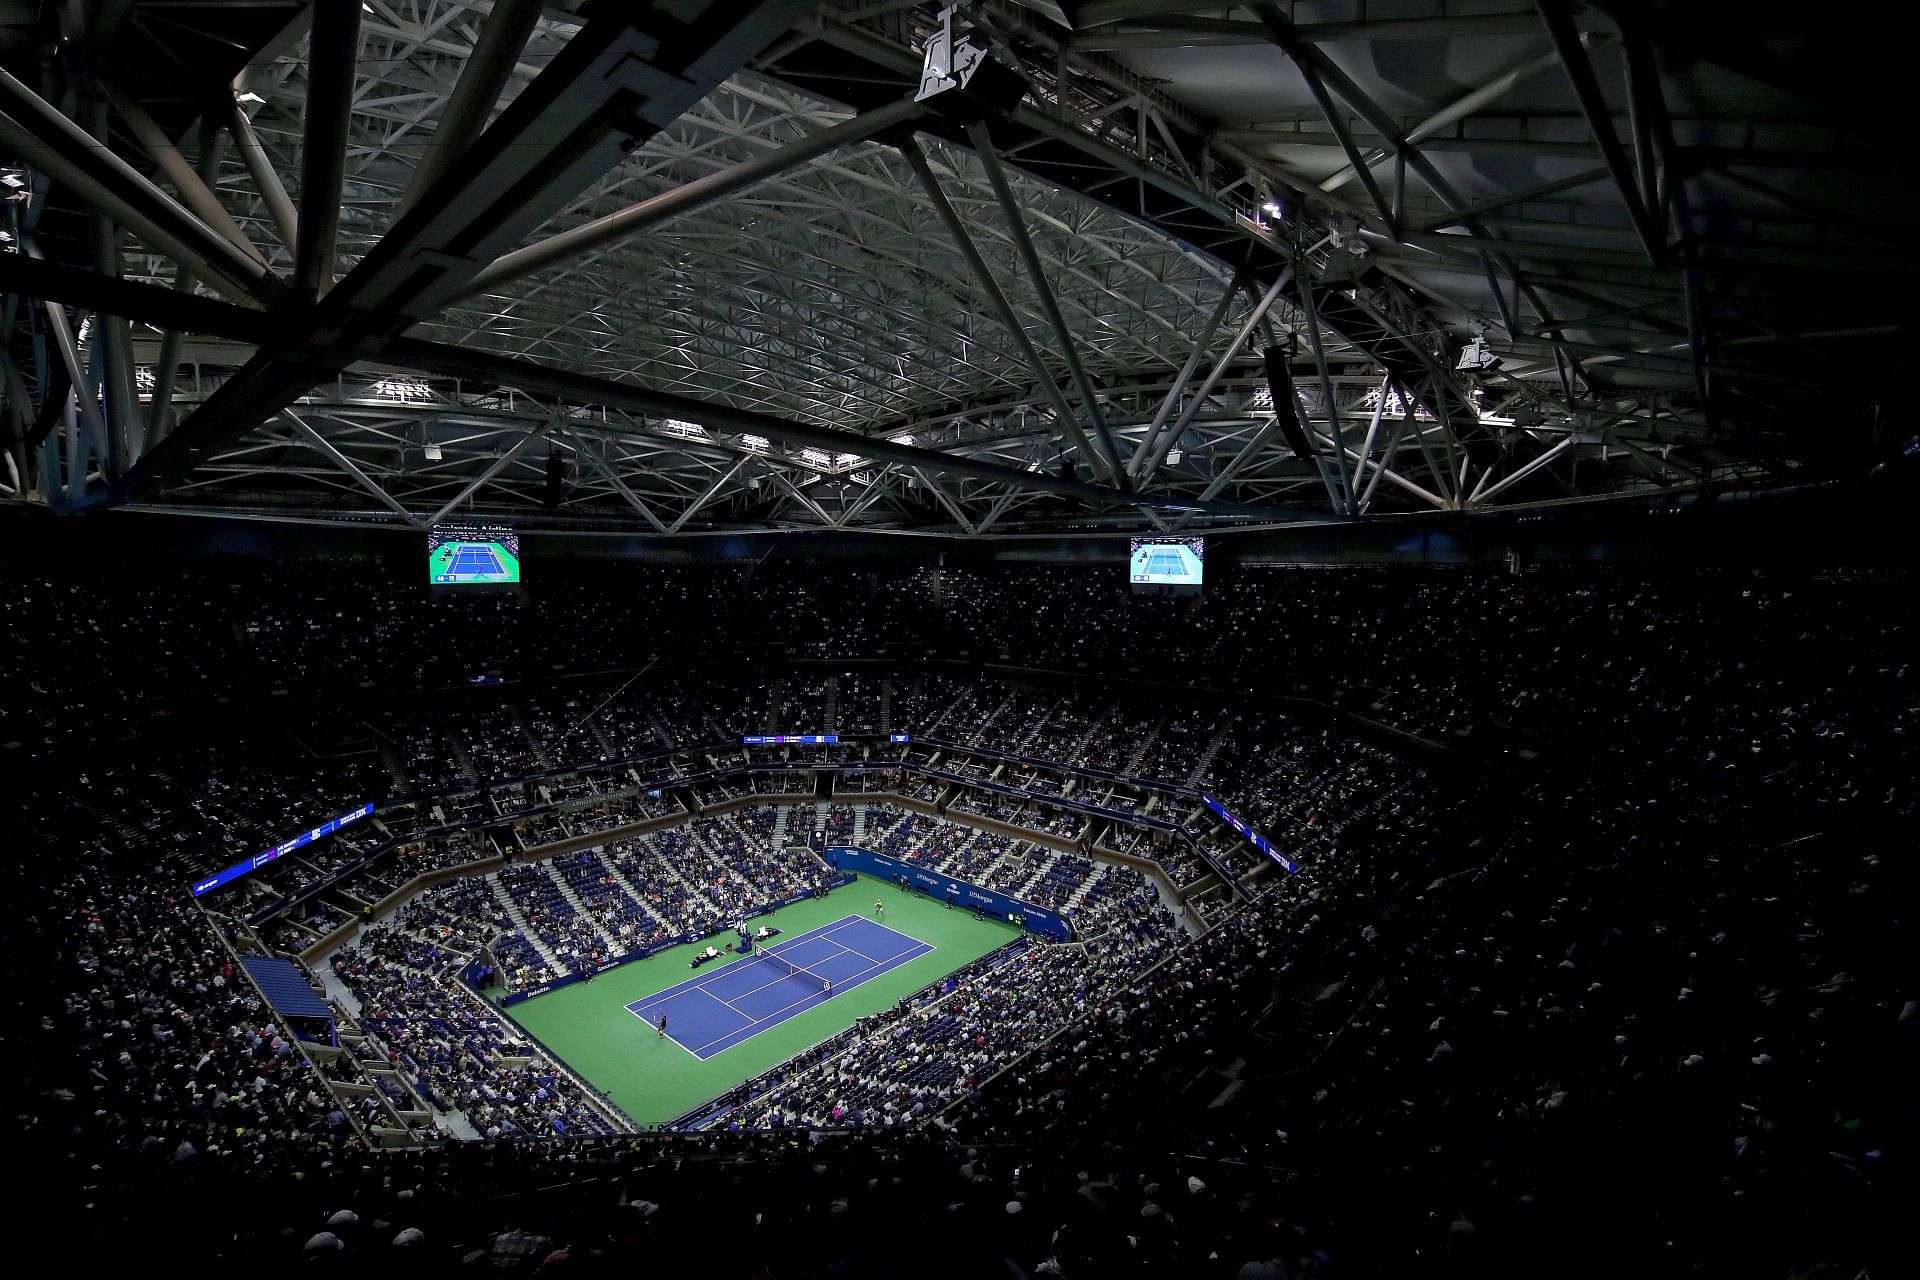 A general view of the Arthur Ashe stadium